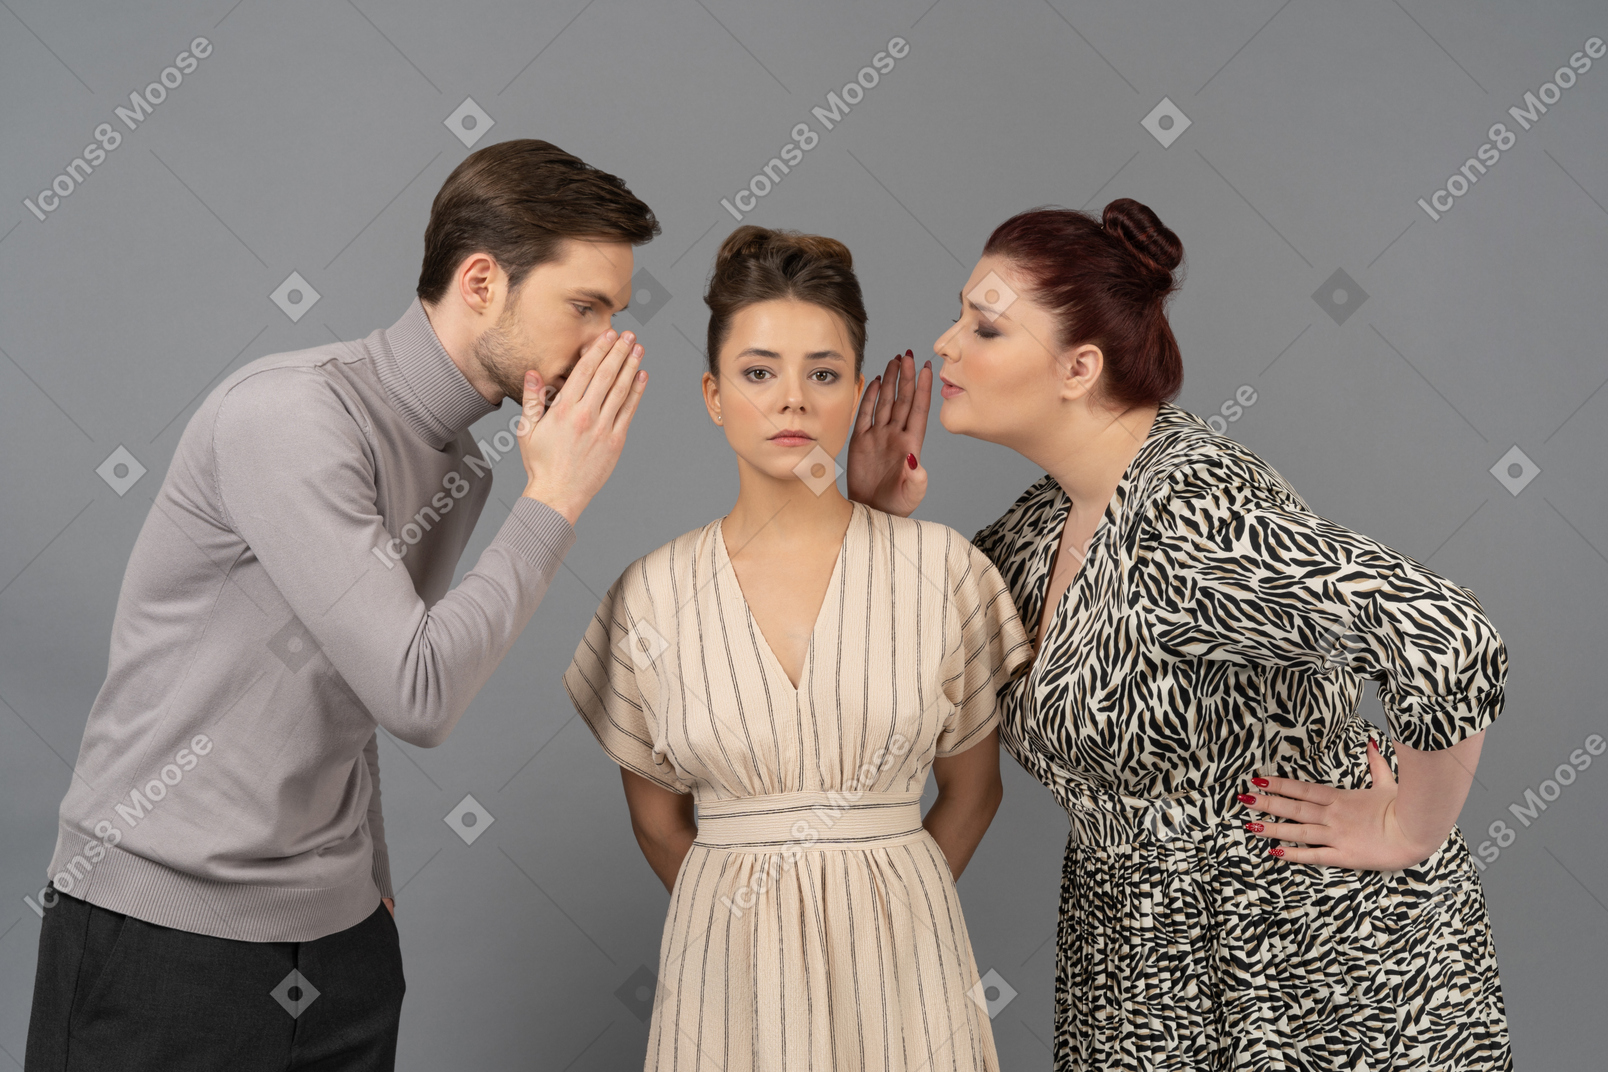 Young man and young woman gossiping in indifferent woman's ears